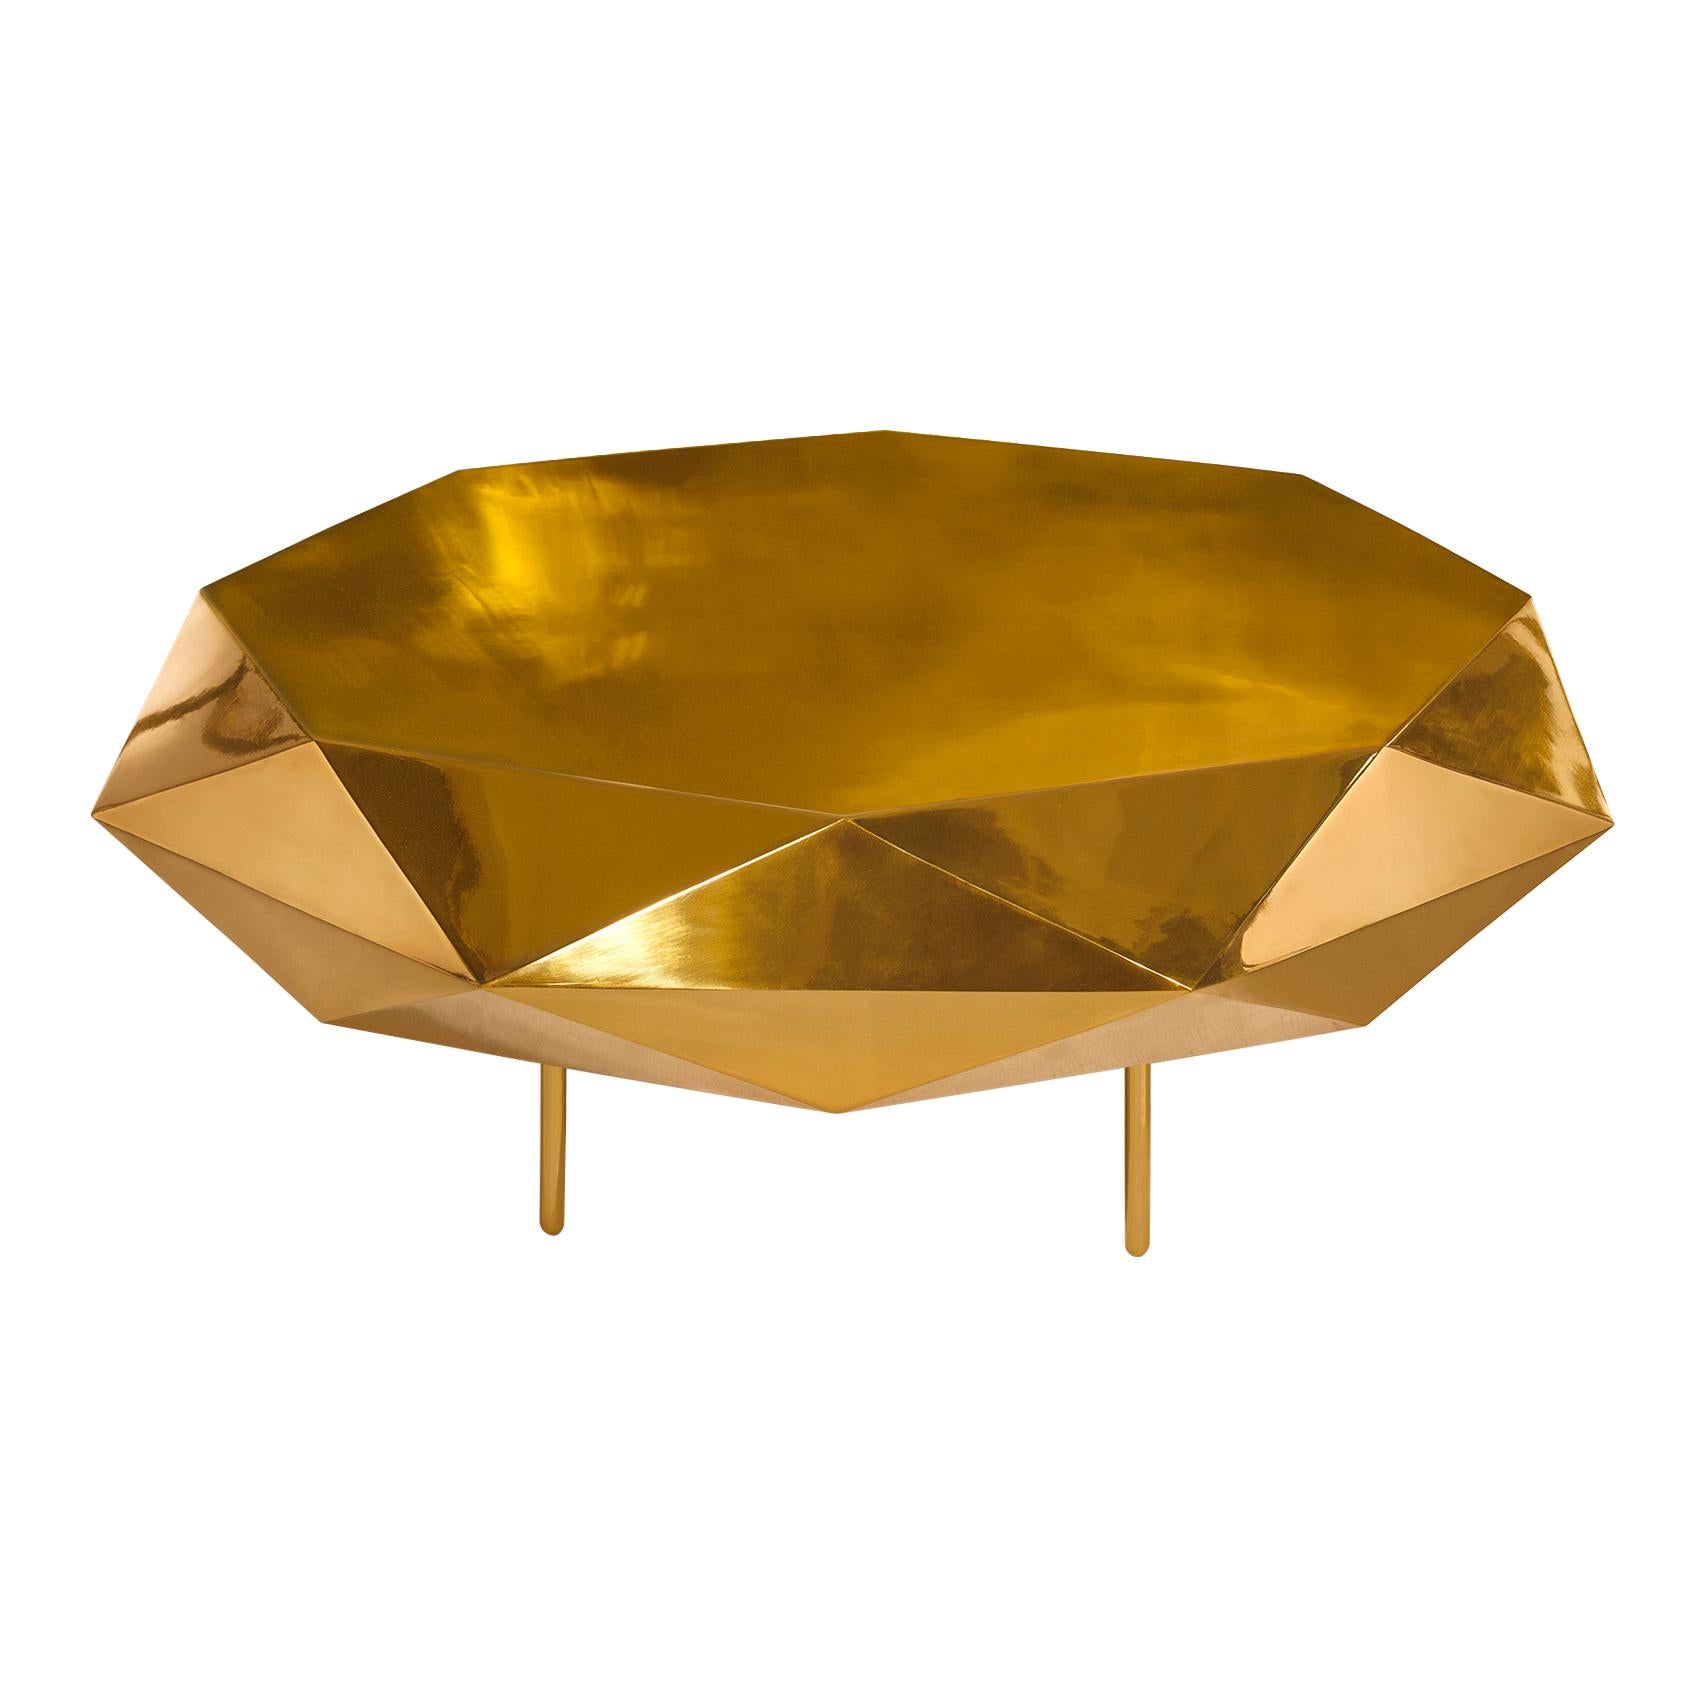 Luxury meets style in the gorgeous Stella Large Coffee Table Gold by Nika Zupanc. It is available in gold or rose gold, circular with a starry edge, and delightful in any interior space.

Nika Zupanc, a strikingly renowned Slovenian designer, never